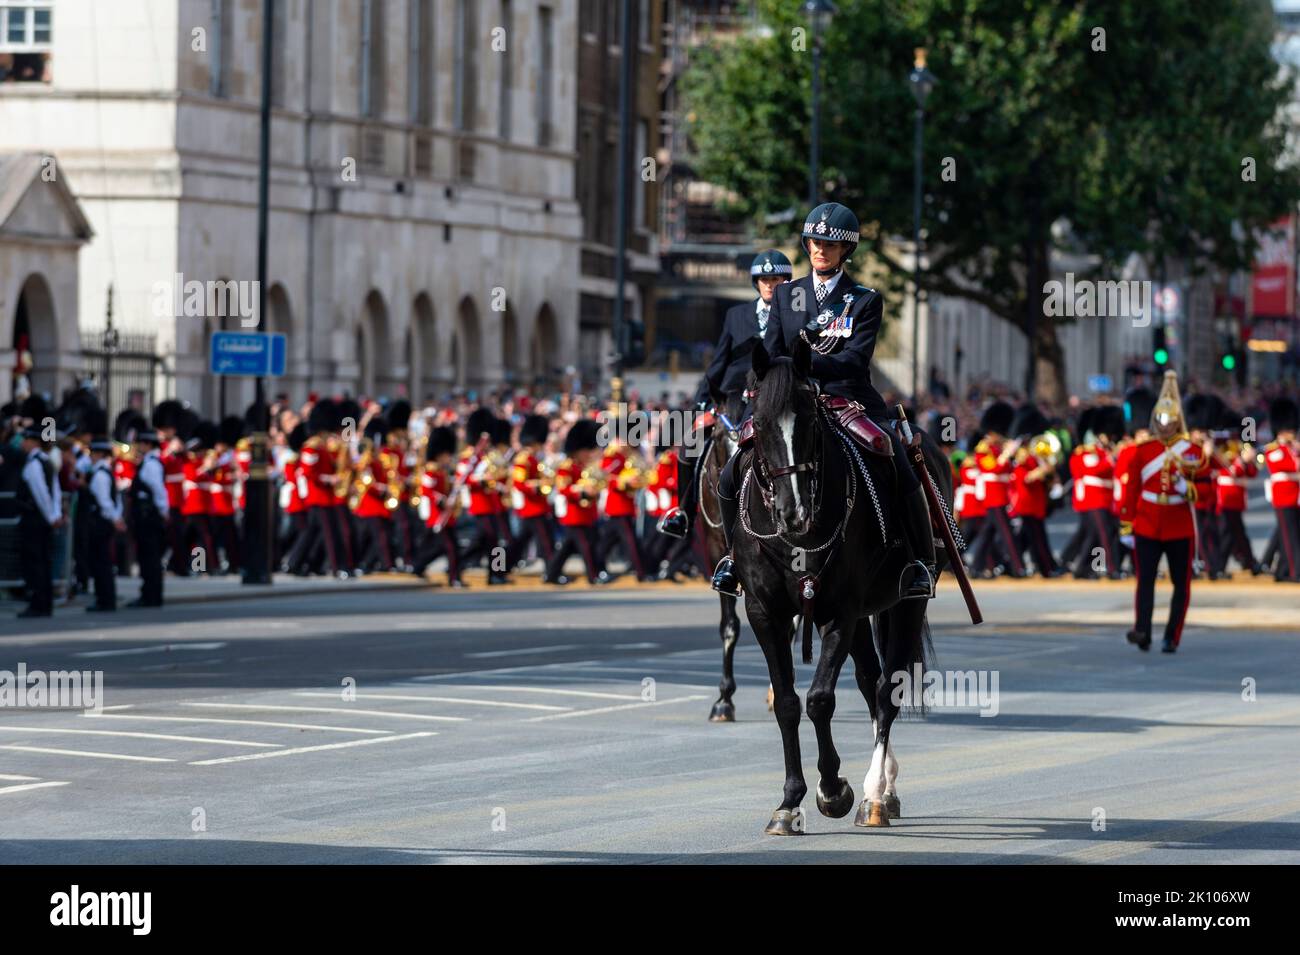 London, UK.  14 September 2022. Members of the police precede the late Queen’s coffin carried on a gun carriage in Whitehall en route to Westminster Hall where it will lie in state for four days allowing the public to visit to pay their respects, ahead of the state funeral on 19 September.  Queen Elizabeth II, the longest-reigning monarch in British history, died at the age of 96 in Balmoral, Scotland and her son, now known as King Charles III, has succeeded her.  Credit: Stephen Chung / Alamy Live News Stock Photo